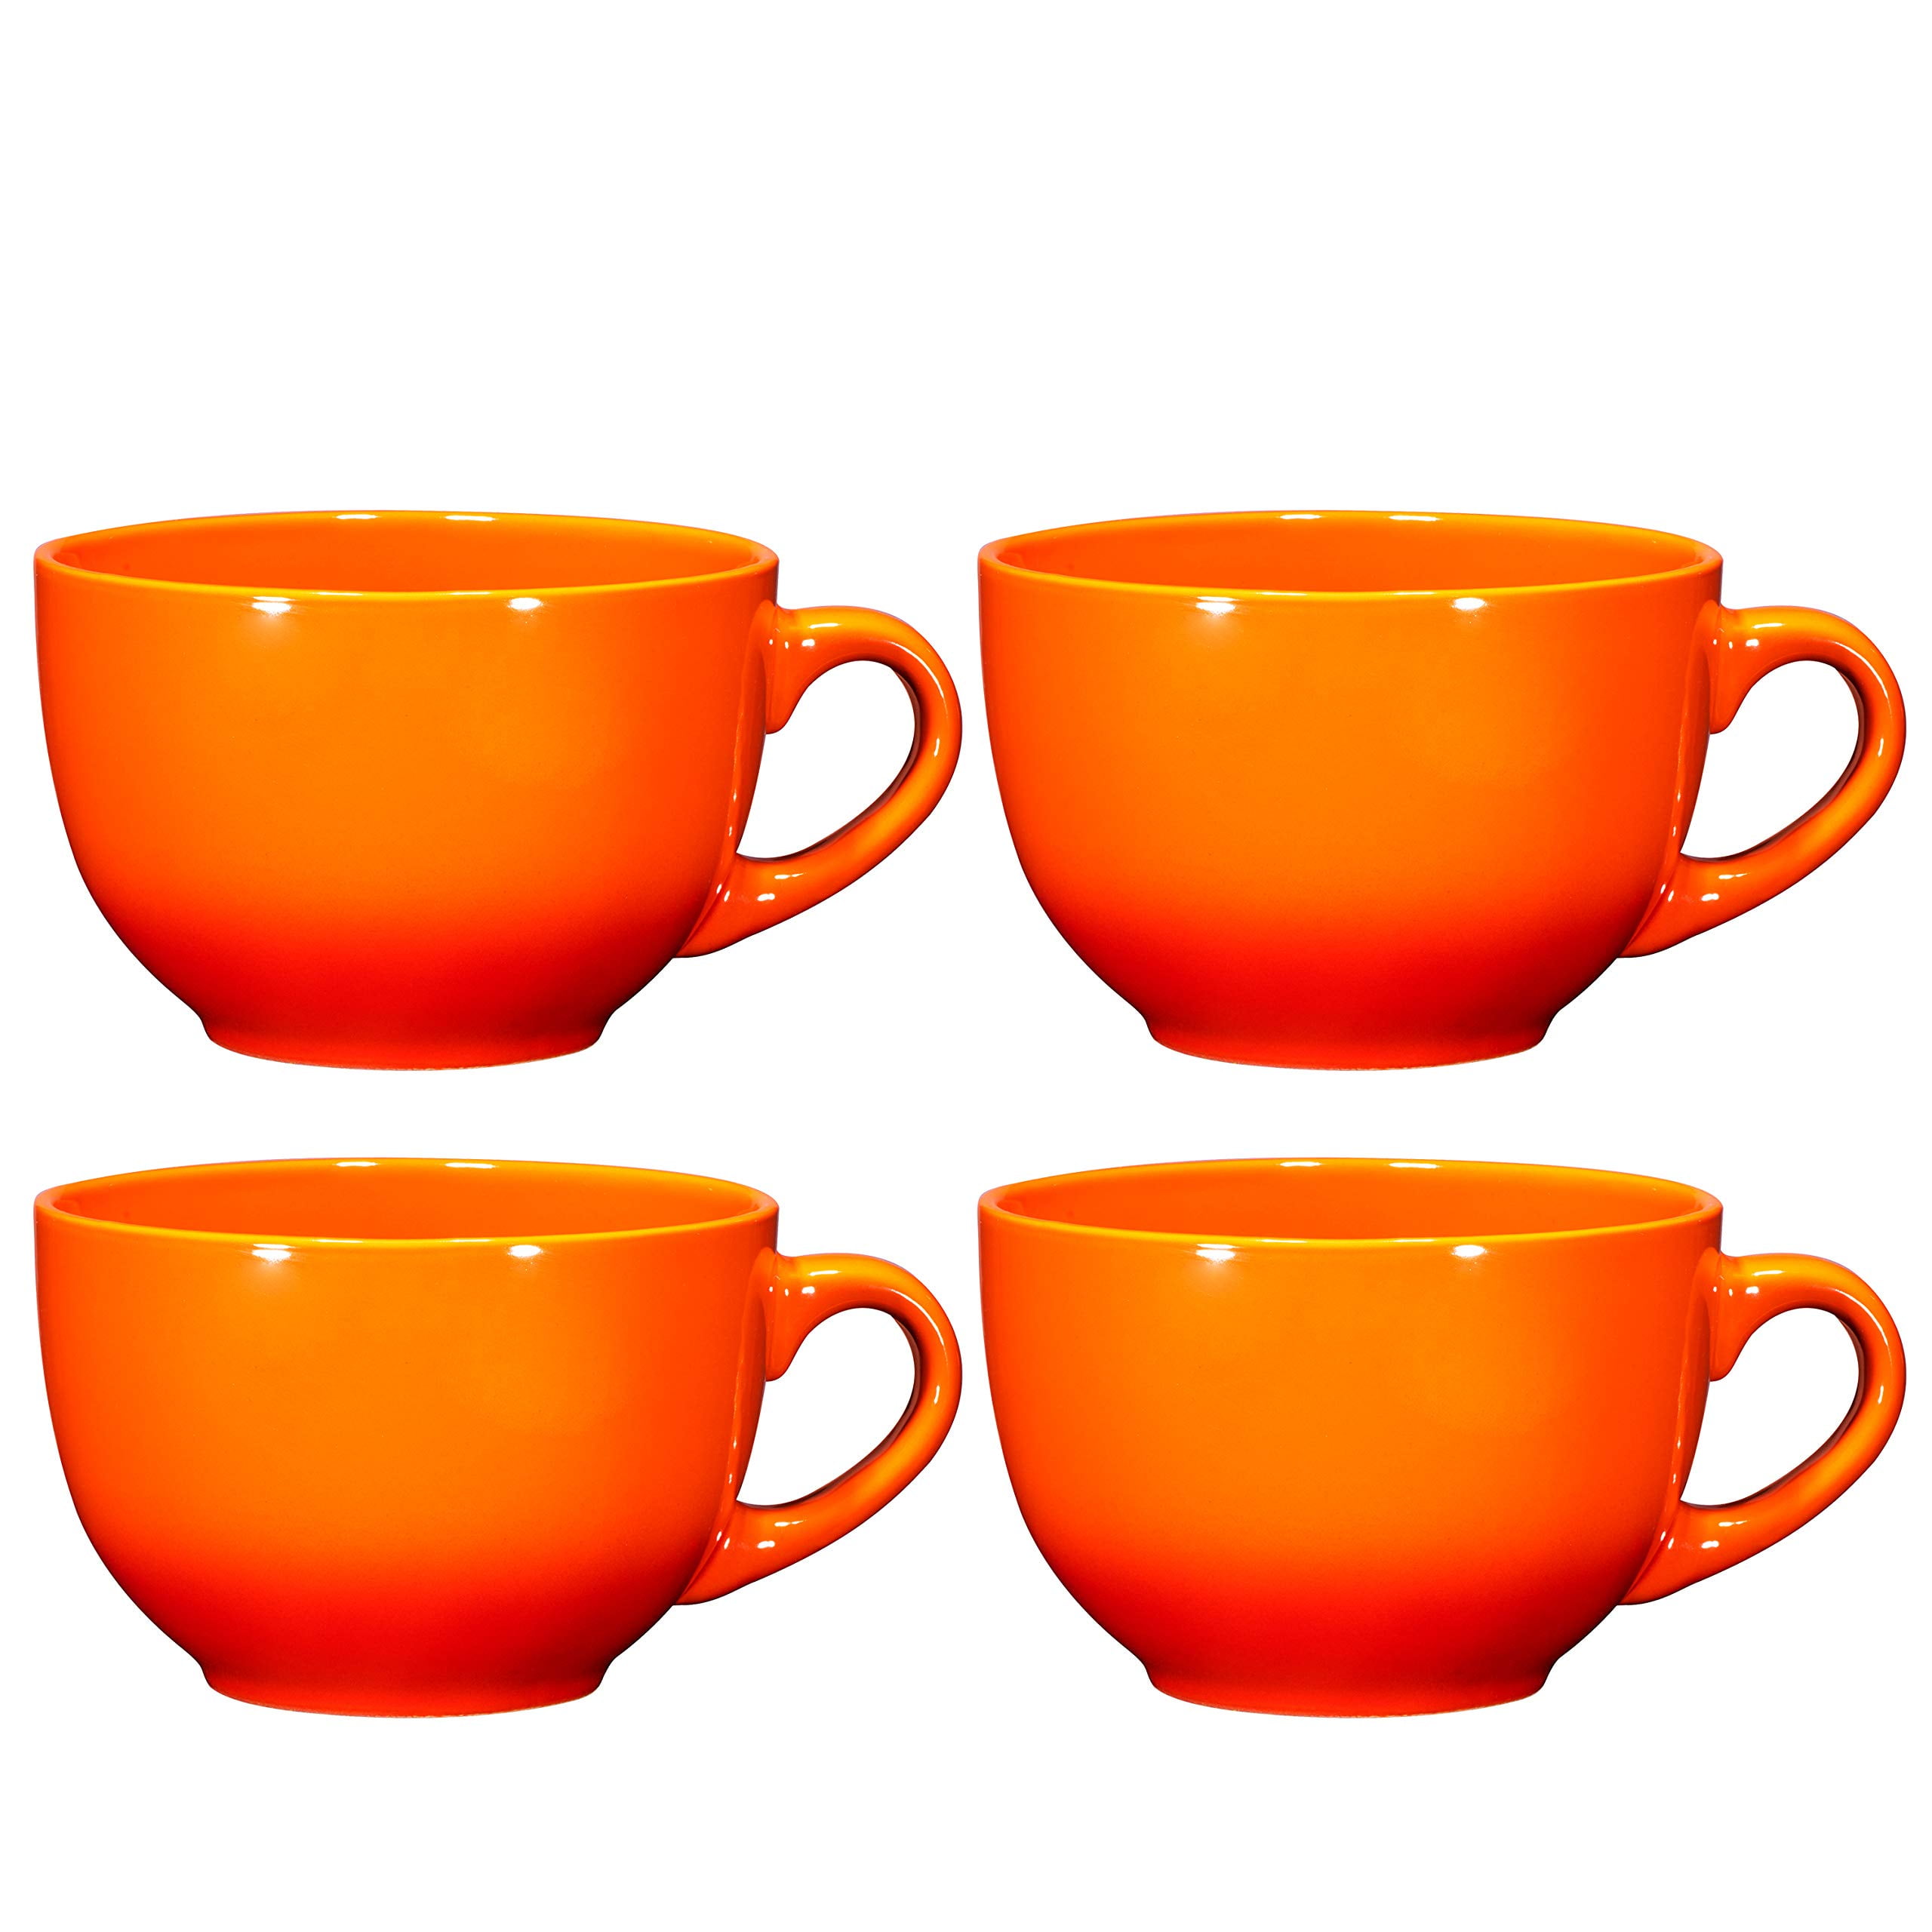 Bruntmor 6 Oz Cappuccino Coffee Cup Set of 6, Cute 6 Ounce Ceramic Mugcup  Set In Multiple Colors, Be…See more Bruntmor 6 Oz Cappuccino Coffee Cup Set